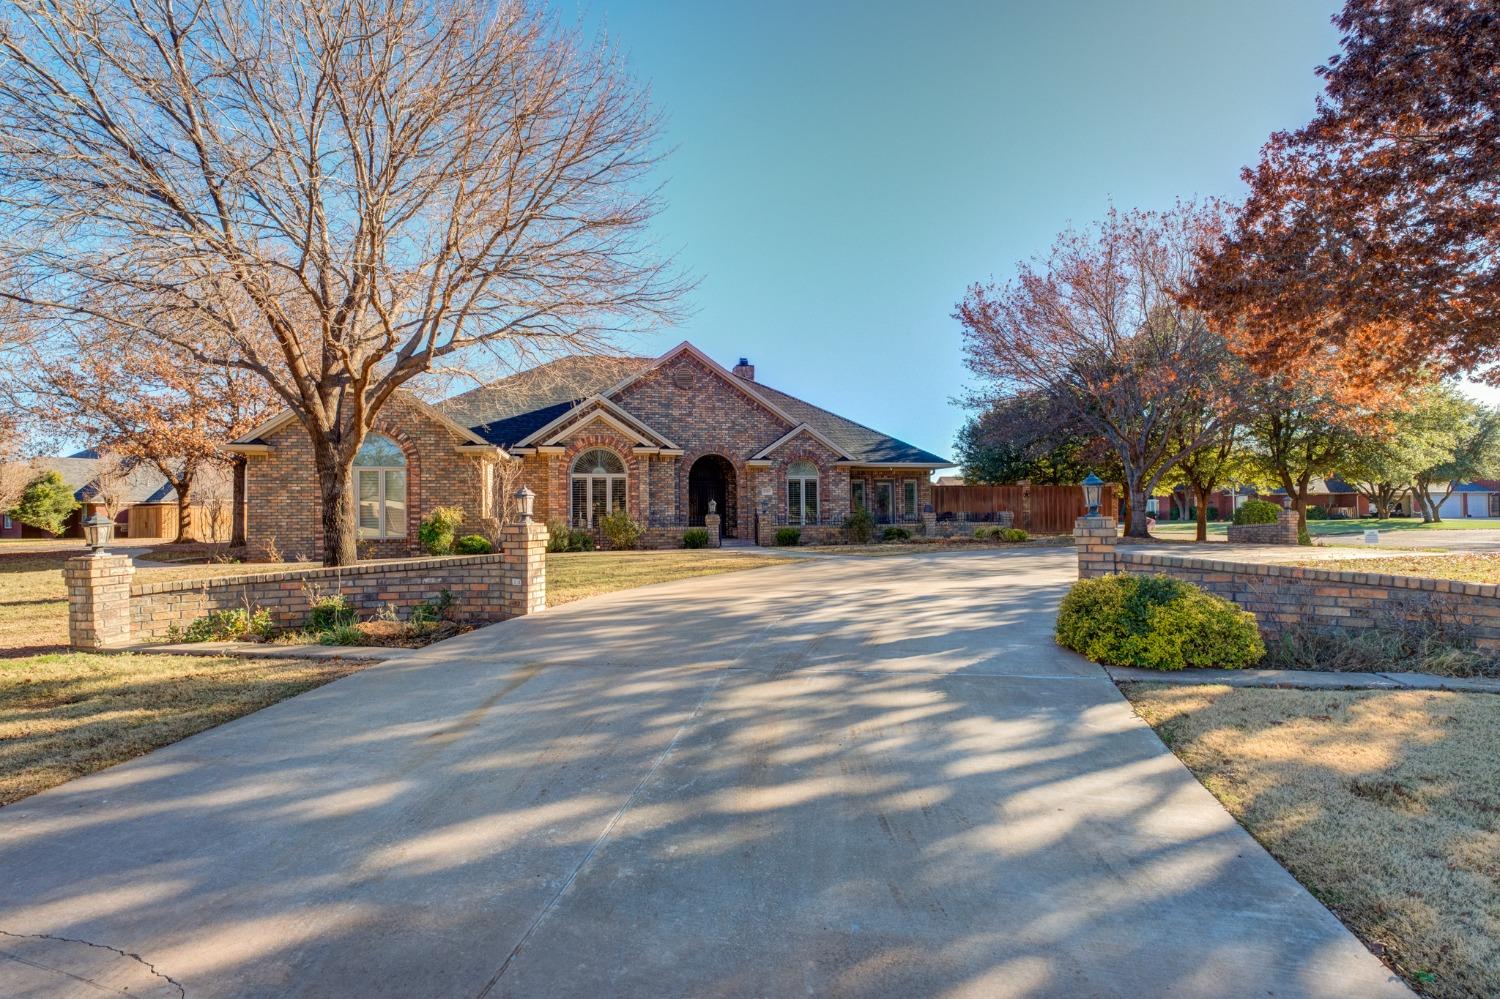 This 4/4/5 in Llano has everything you've ever dreamed of! Live a life of luxury complete with a pool, casita, shop, game room, basement and no city taxes. As you approach this home, you'll be greeted by excellent curb appeal. The living room is complete with a grand fireplace, and the layout seamlessly connects the living room to a spacious kitchen equipped with stainless steel appliances, granite countertops, and ample cabinet space. You'll find room for everyone with spacious bedrooms and a casita with kitchen and full bath. The Primary suite is a spacious retreat with a walk-in closet an en-suite bathroom featuring a luxurious soaking tub, a separate shower, and double vanity sinks. The remaining three bedrooms are spacious with ample closet space. The garage boasts epoxy floors and an almost 900 SF workshop. The possibilities for entertaining are endless with basement, game room, casita, beautiful pool and outdoor living area. You'll be sure to make memories for a lifetime here!